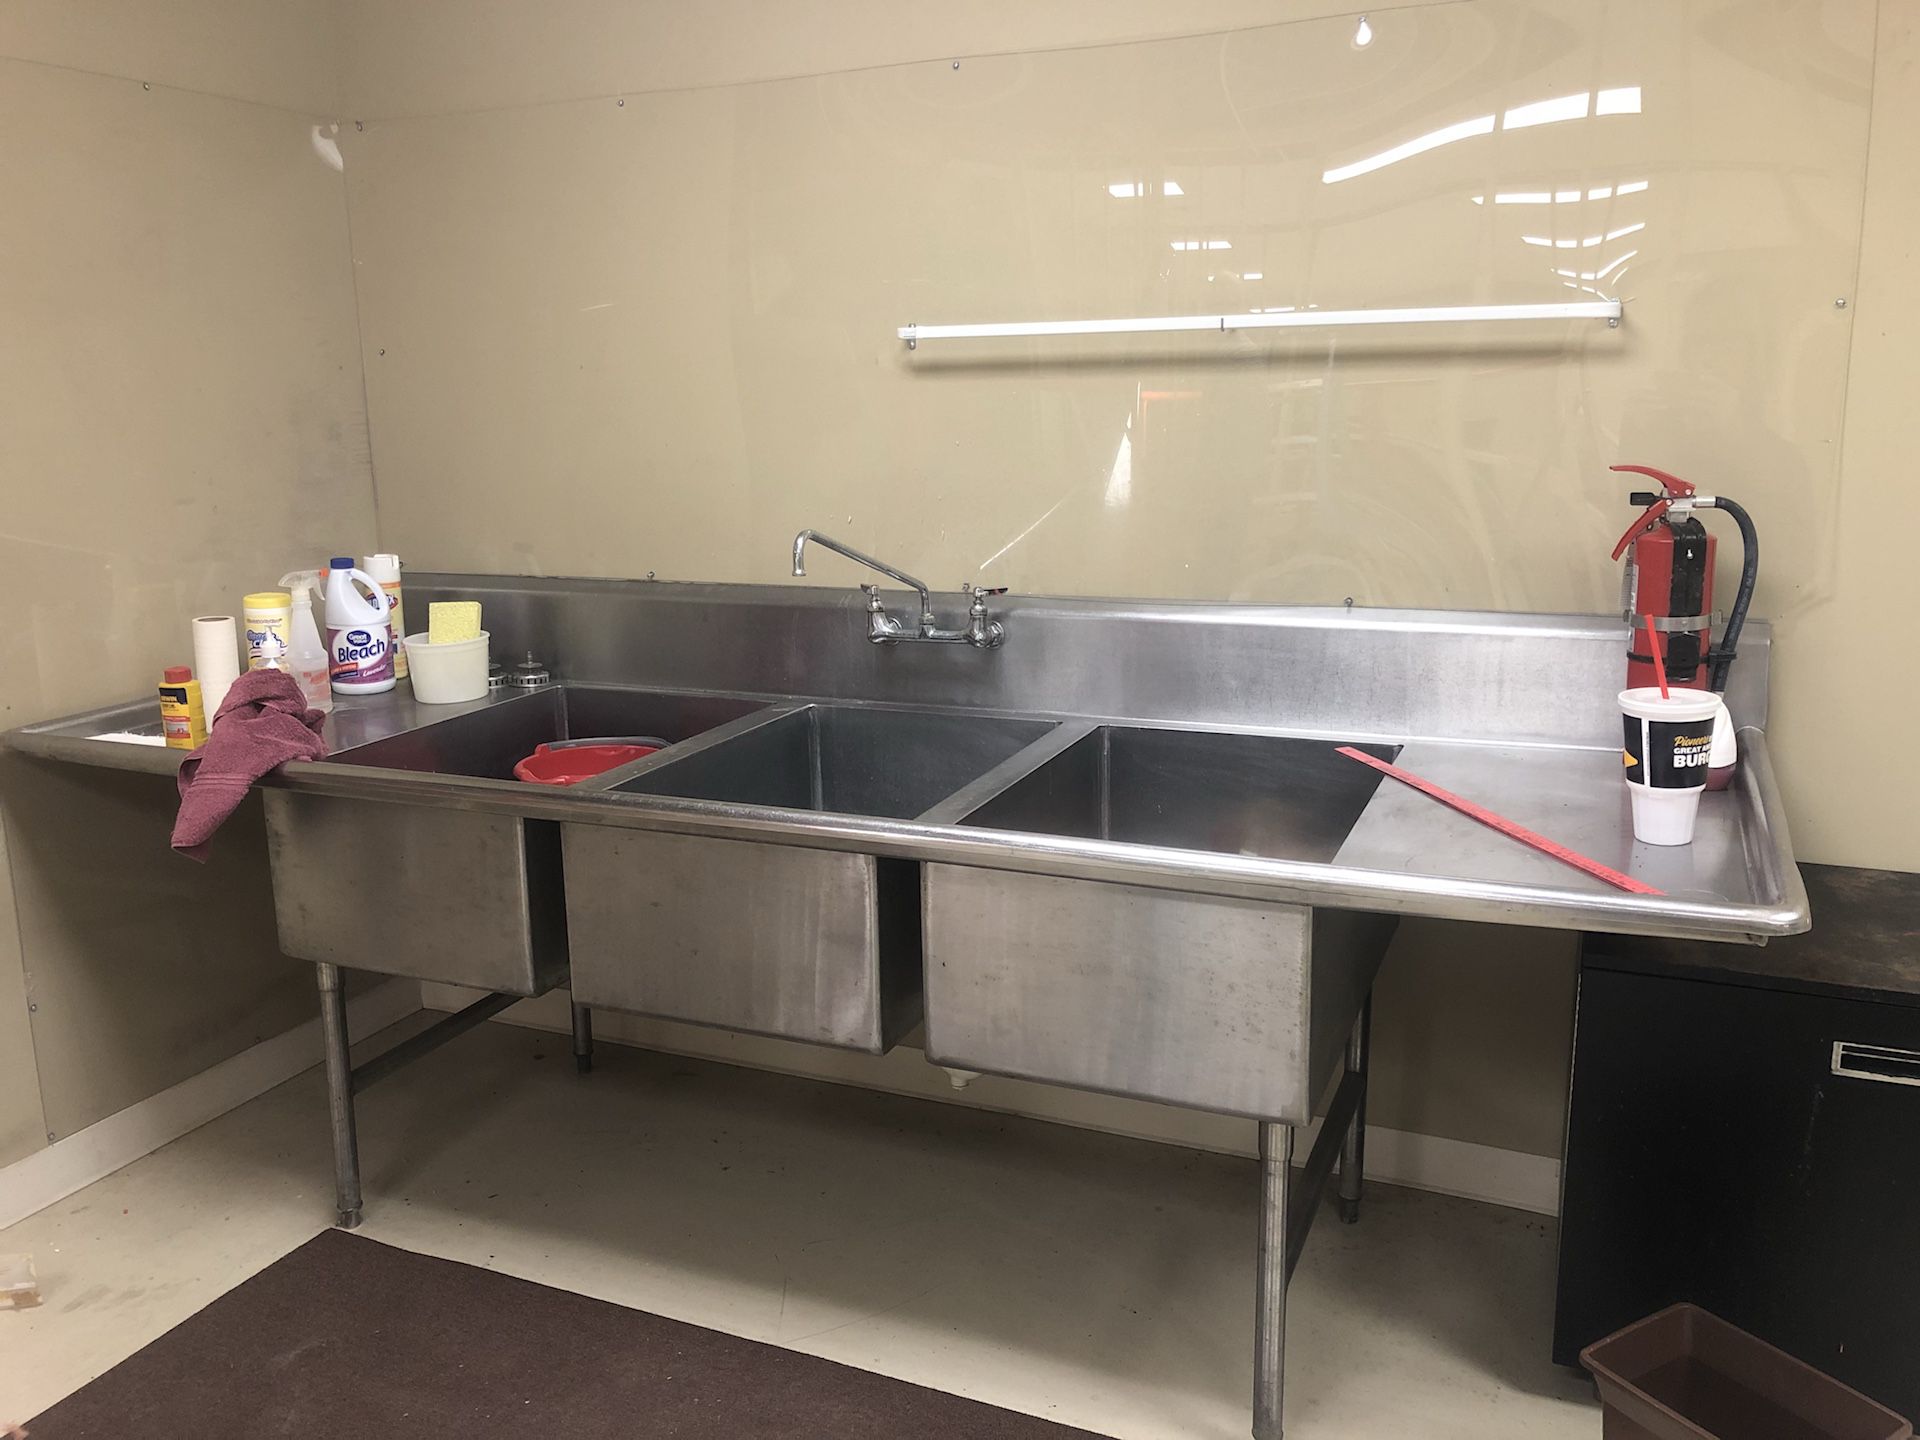 Commercial grade 3 bowl stainless steel sink.